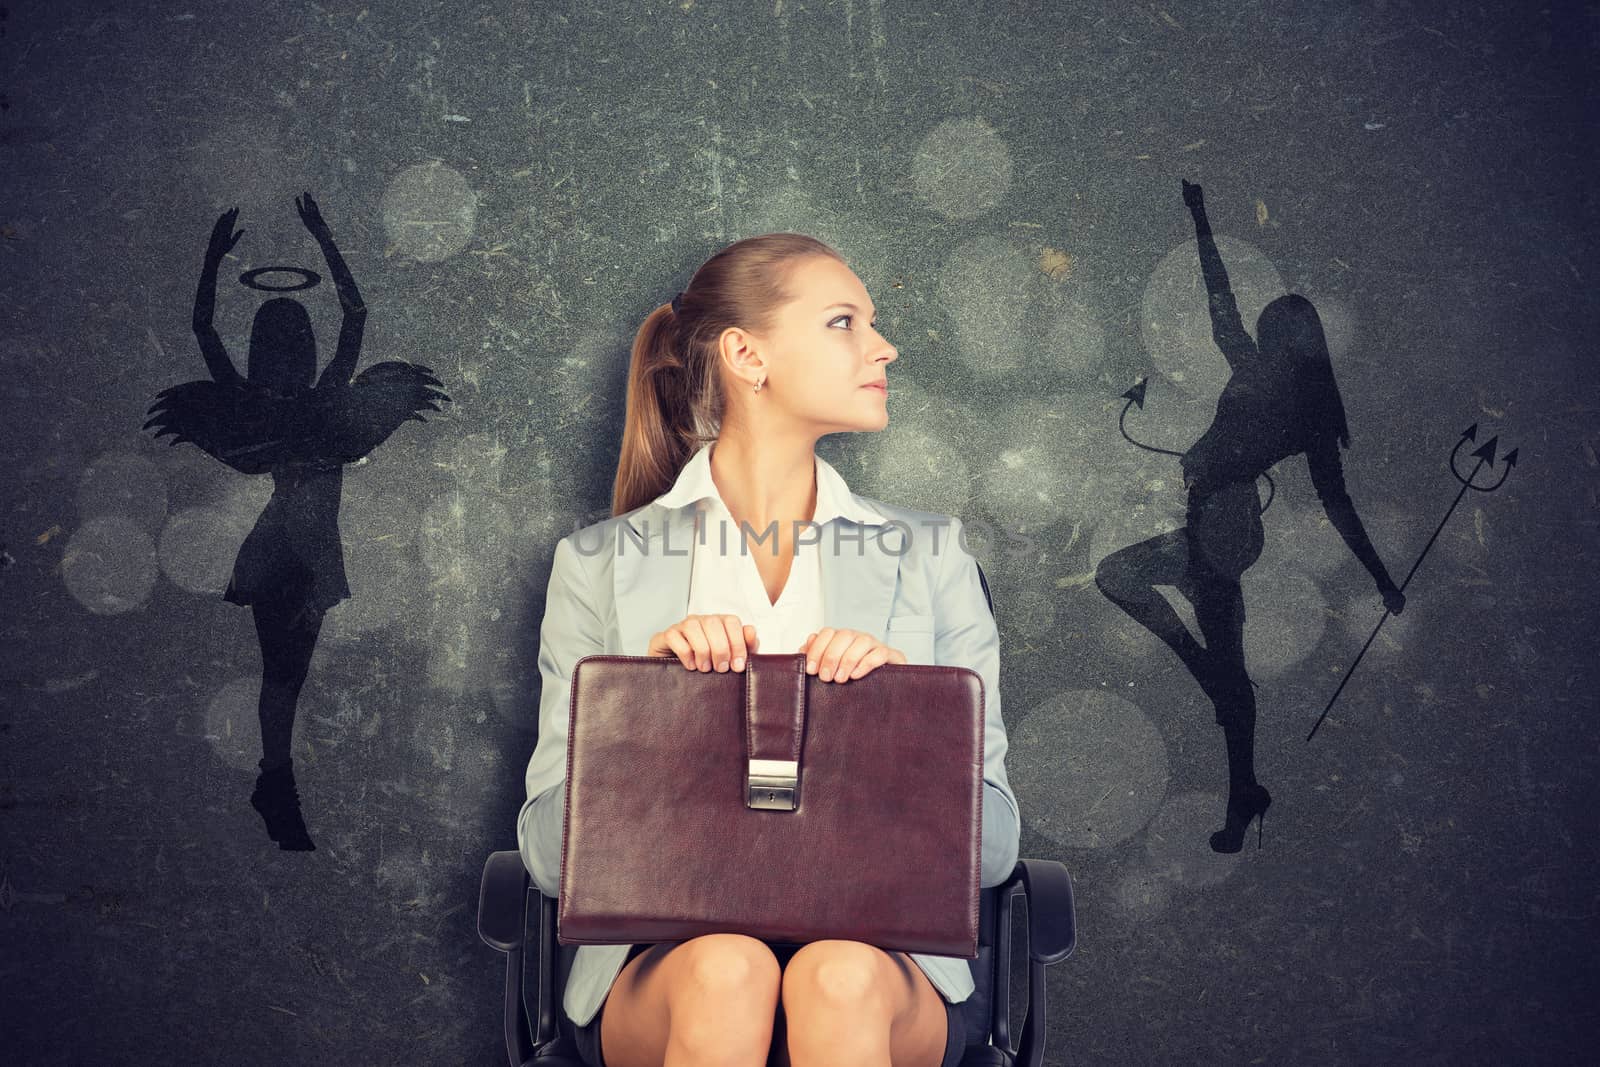 Young Businesswoman Sitting in Chair with Briefcase in Lap Looking to the Side, Framed by Silhouettes of Angel and Devil in Ethical Concept Image